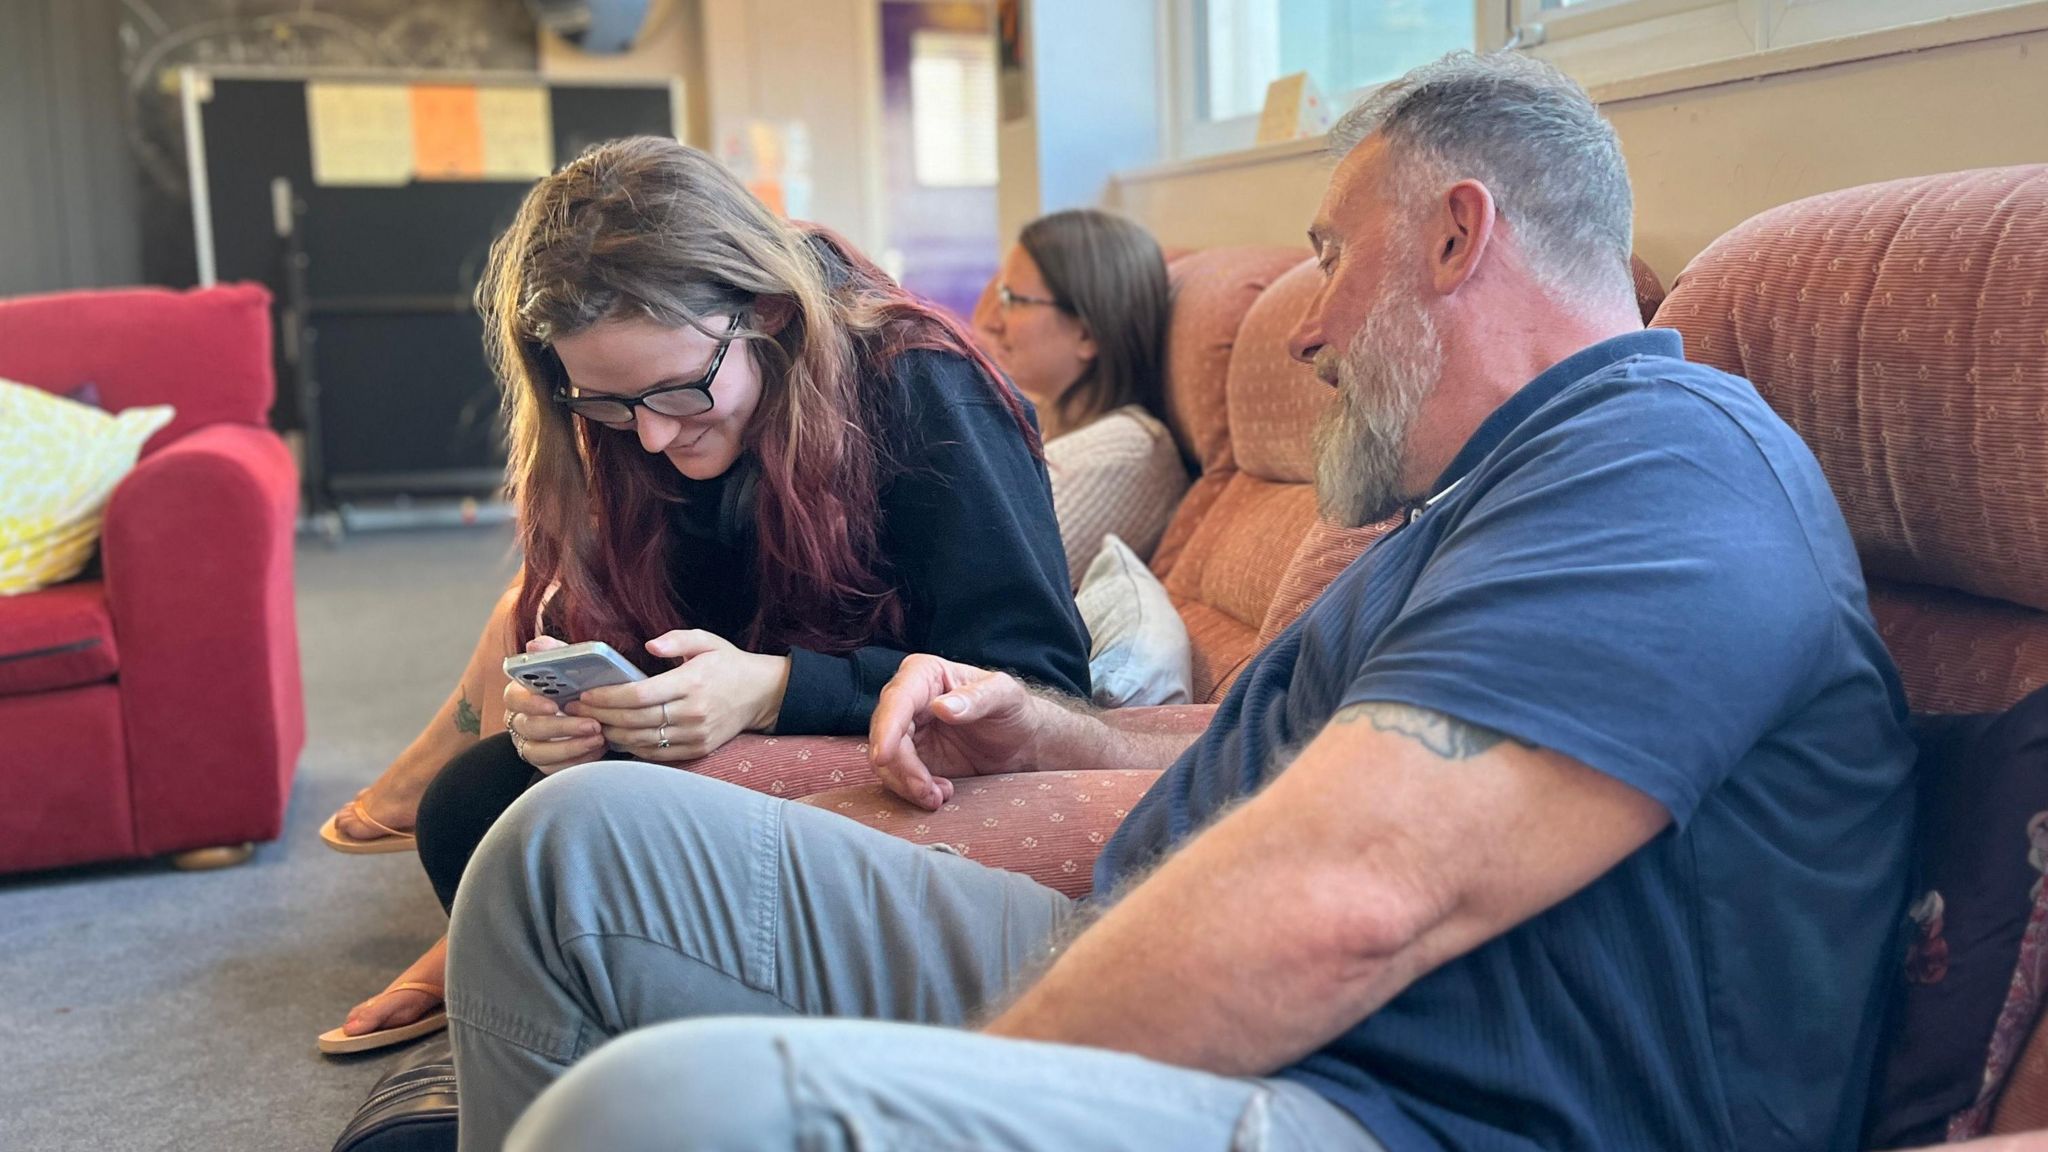 A young women looks at a phone, with an older man sat alongside her on a sofa